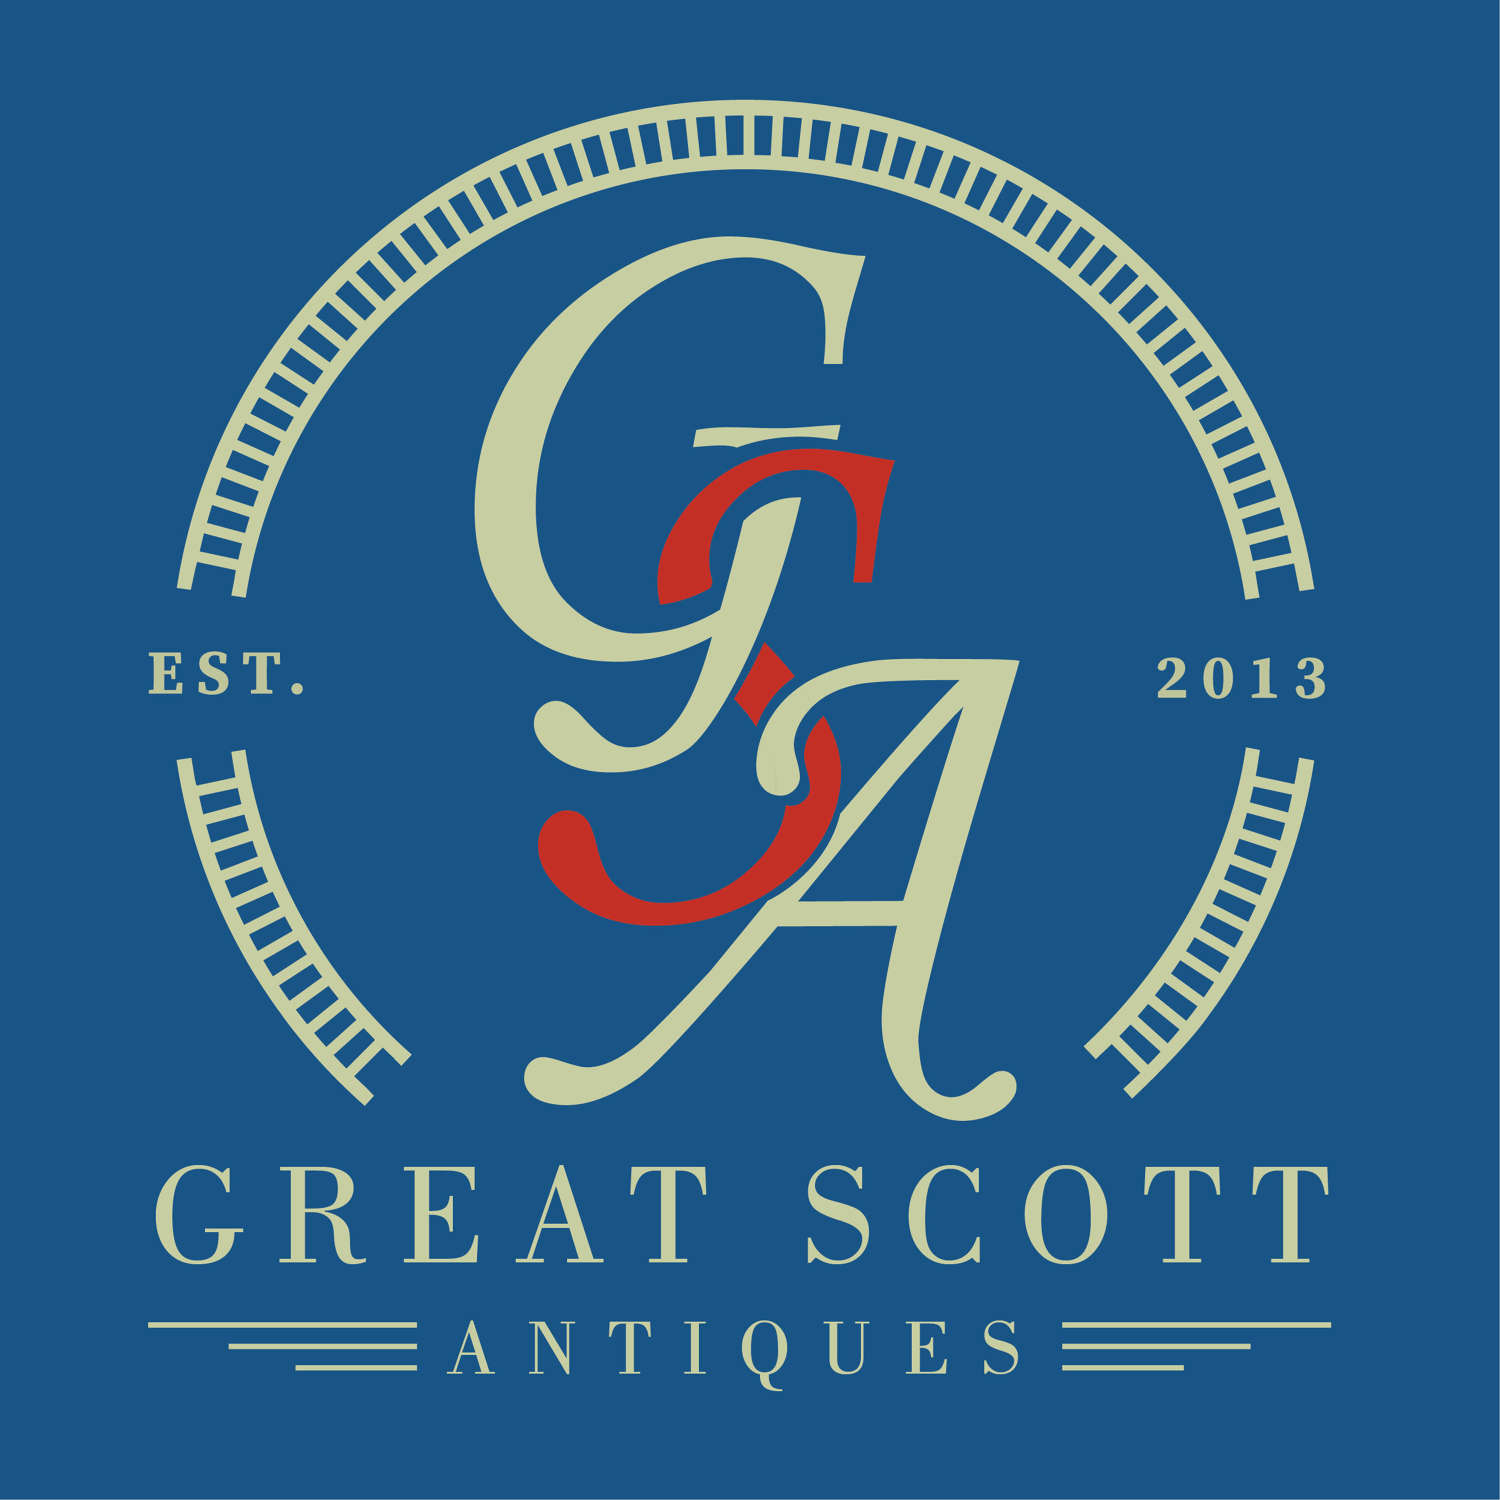 A Seasonal Christmas Message From Great Scott Antiques